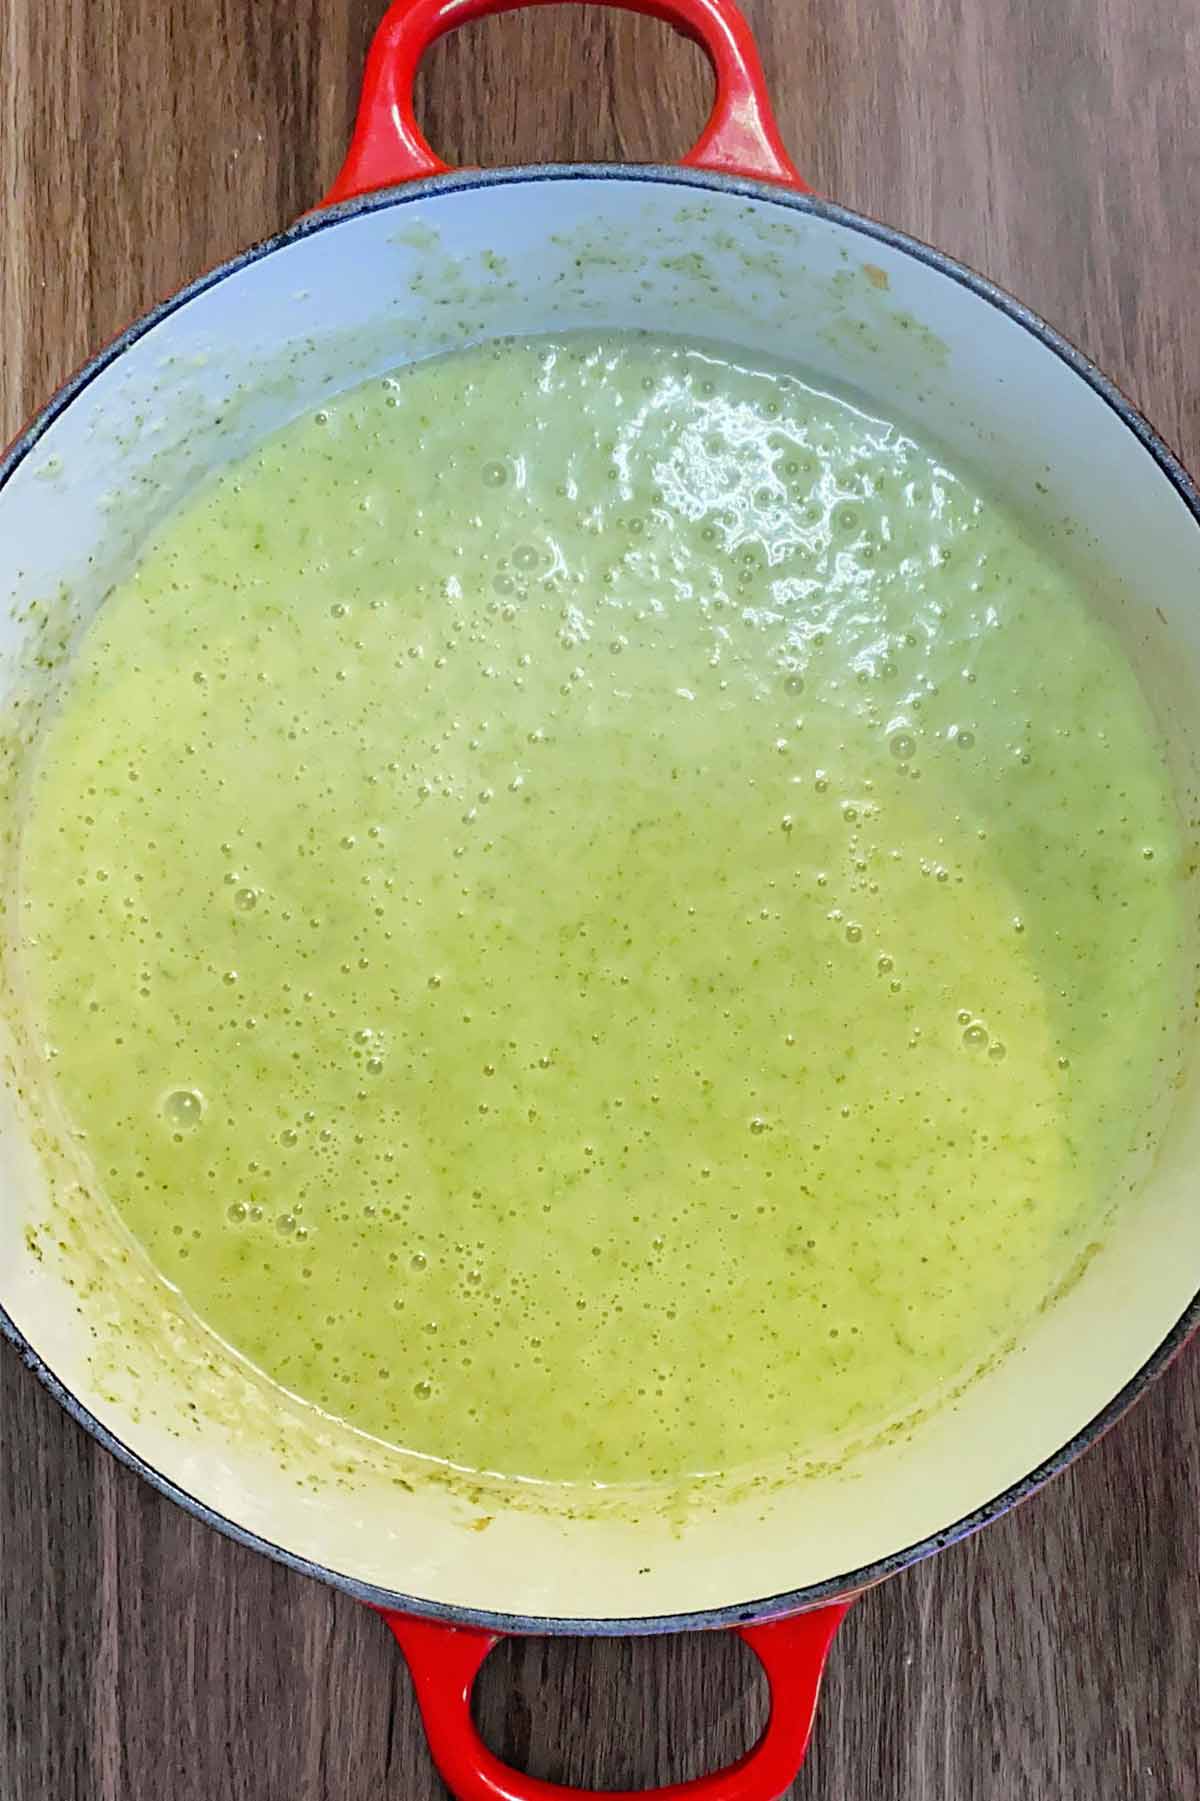 The soup blended in the pan.